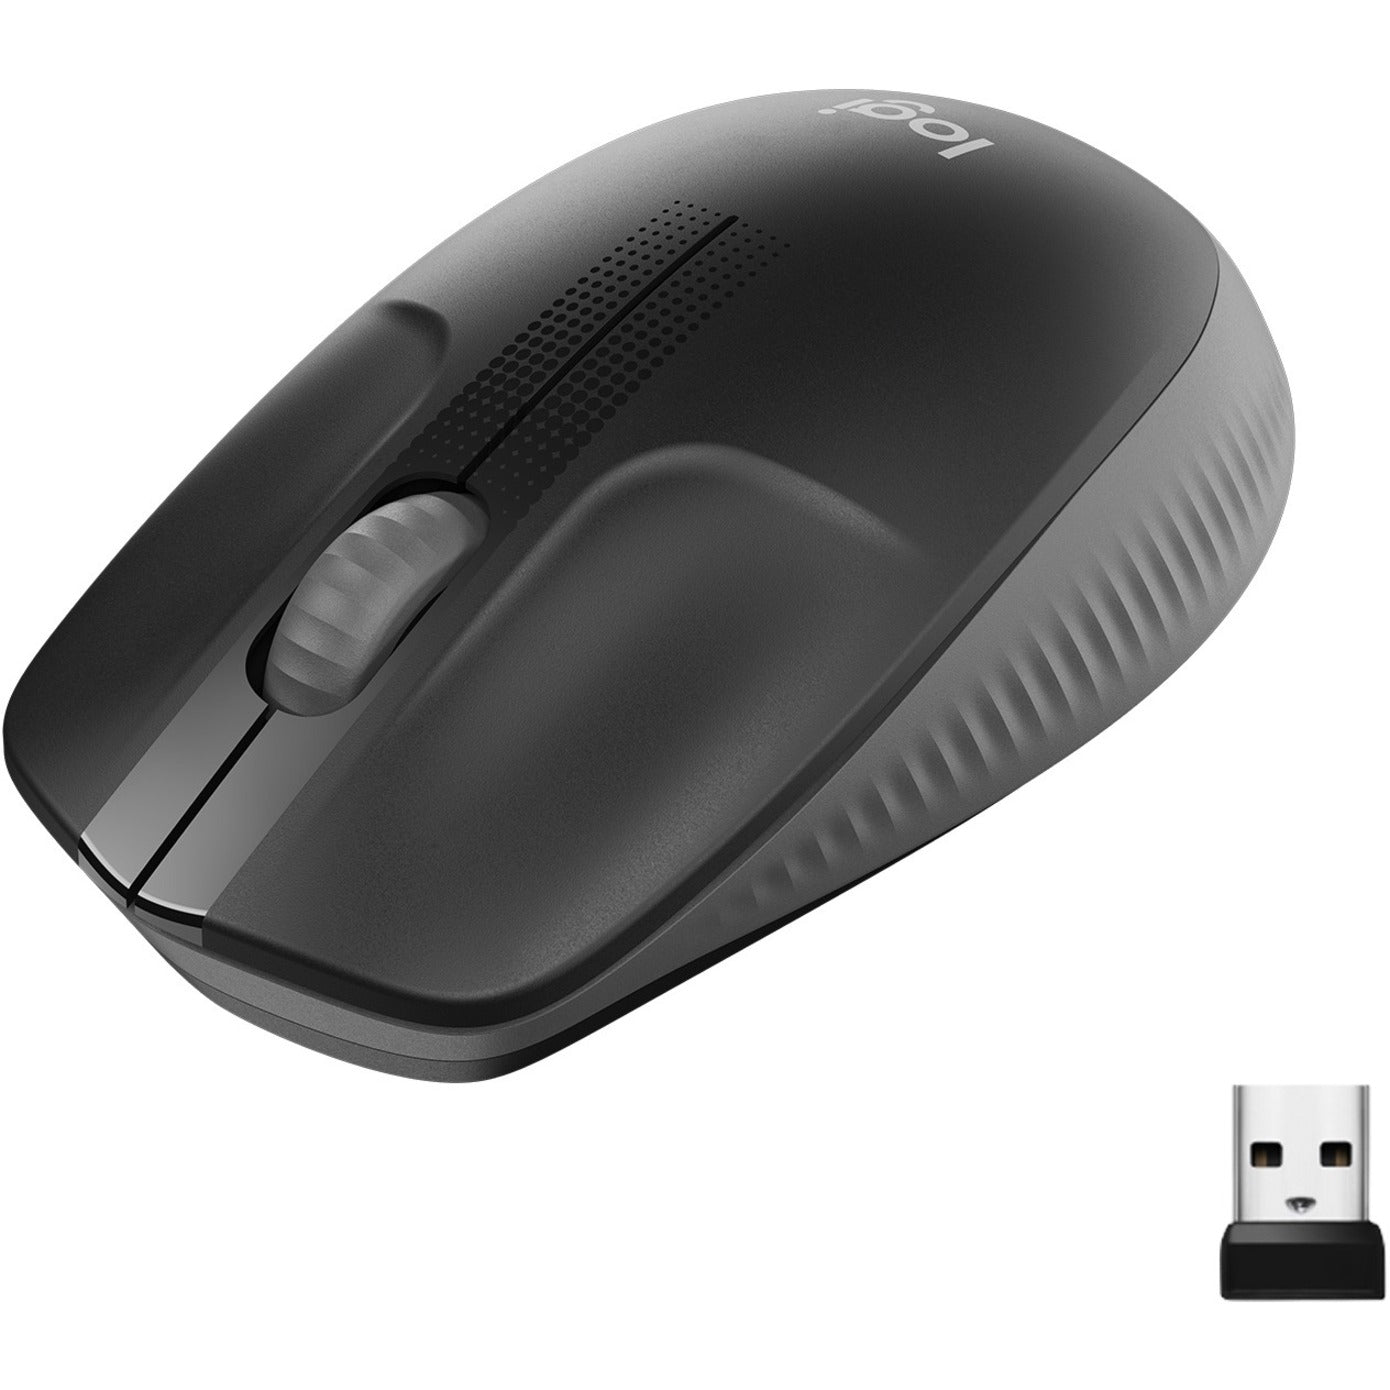 Logitech 910-005901 M190 Full-Size Wireless Mouse 2.4 GHz Radio Frequency USB Receiver